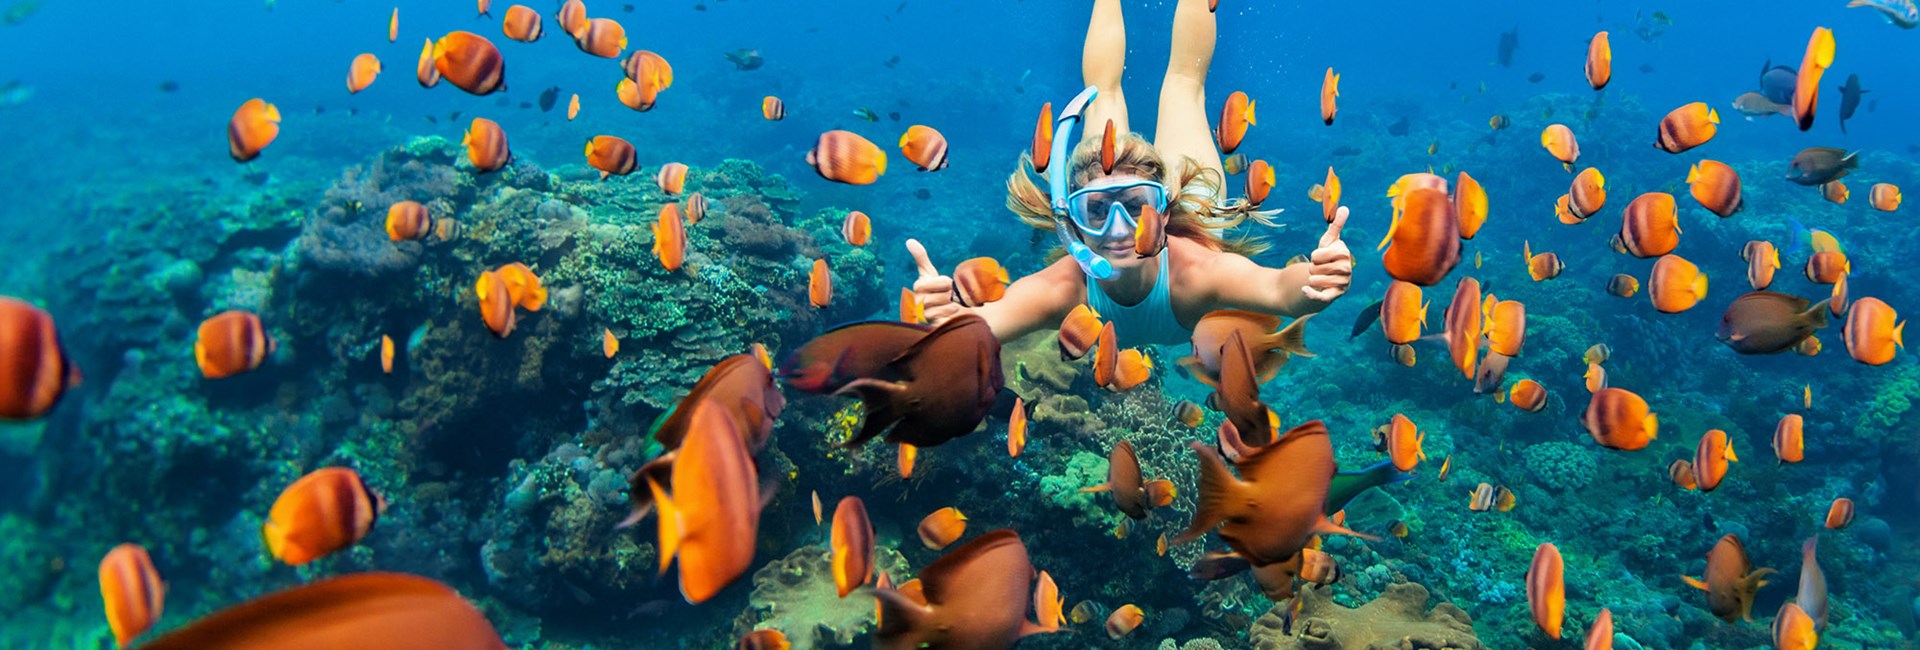 Girl in snorkel mask underwater surrounded by tropical fish above a coral reef